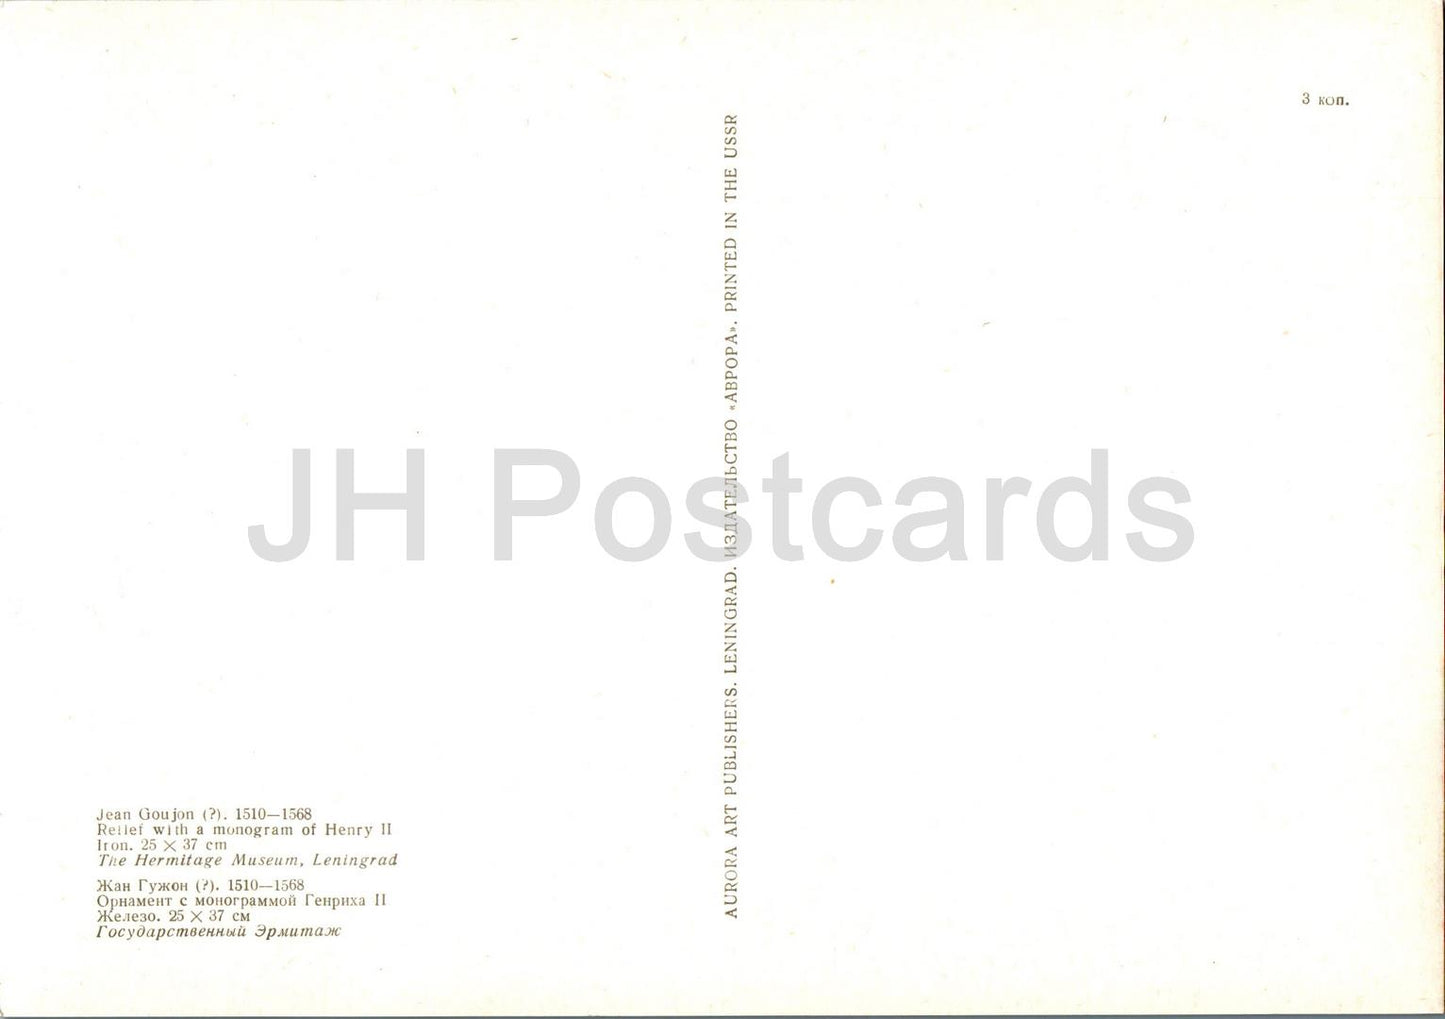 Relief by Jean Goujon - Relief with a monogram of Henry II  French art - Large Format Card - 1975 - Russia USSR - unused